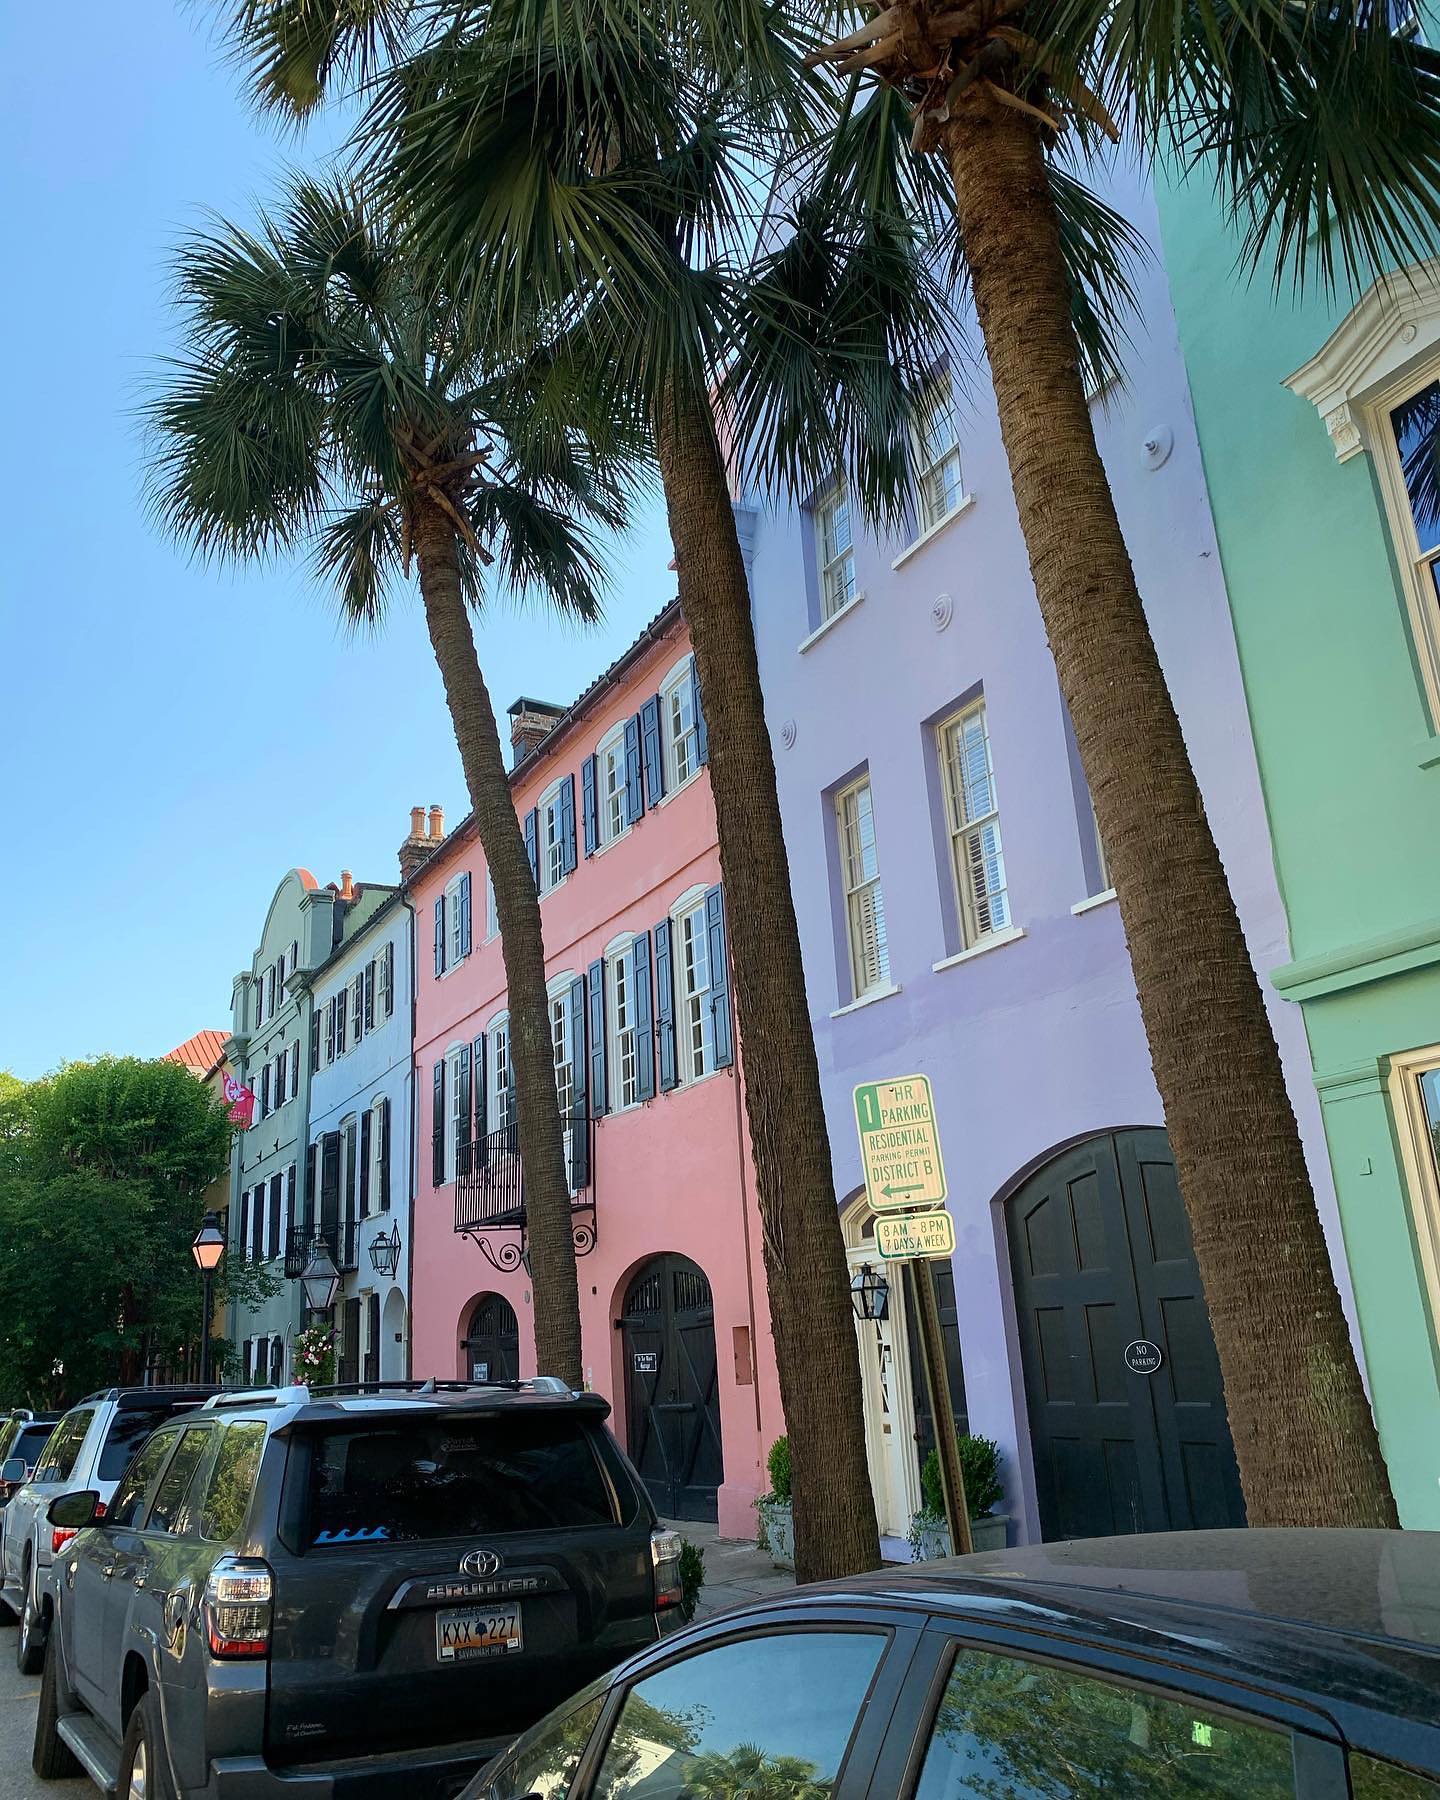 Rainbow Row, in Charleston with its famous pastel colored houses